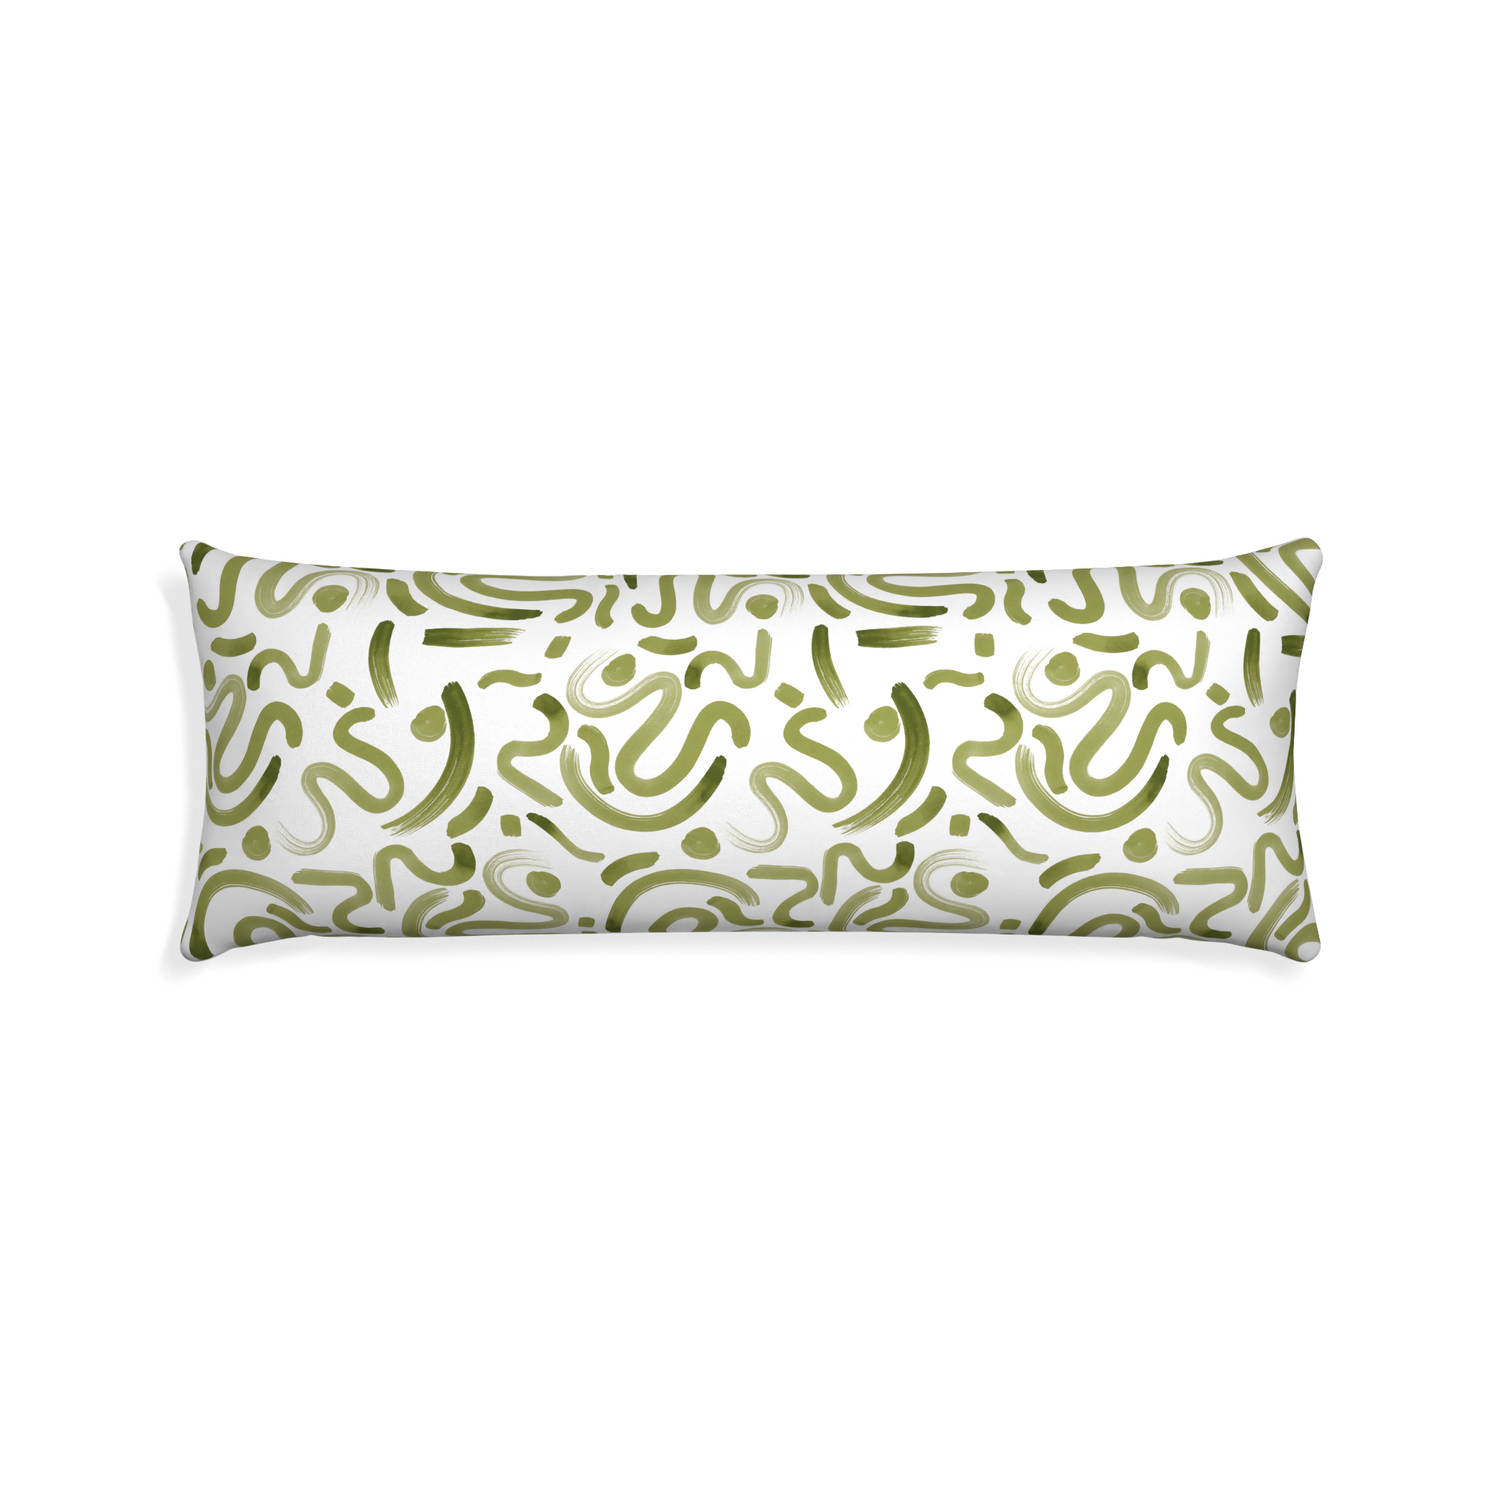 Xl-lumbar hockney moss custom moss greenpillow with none on white background